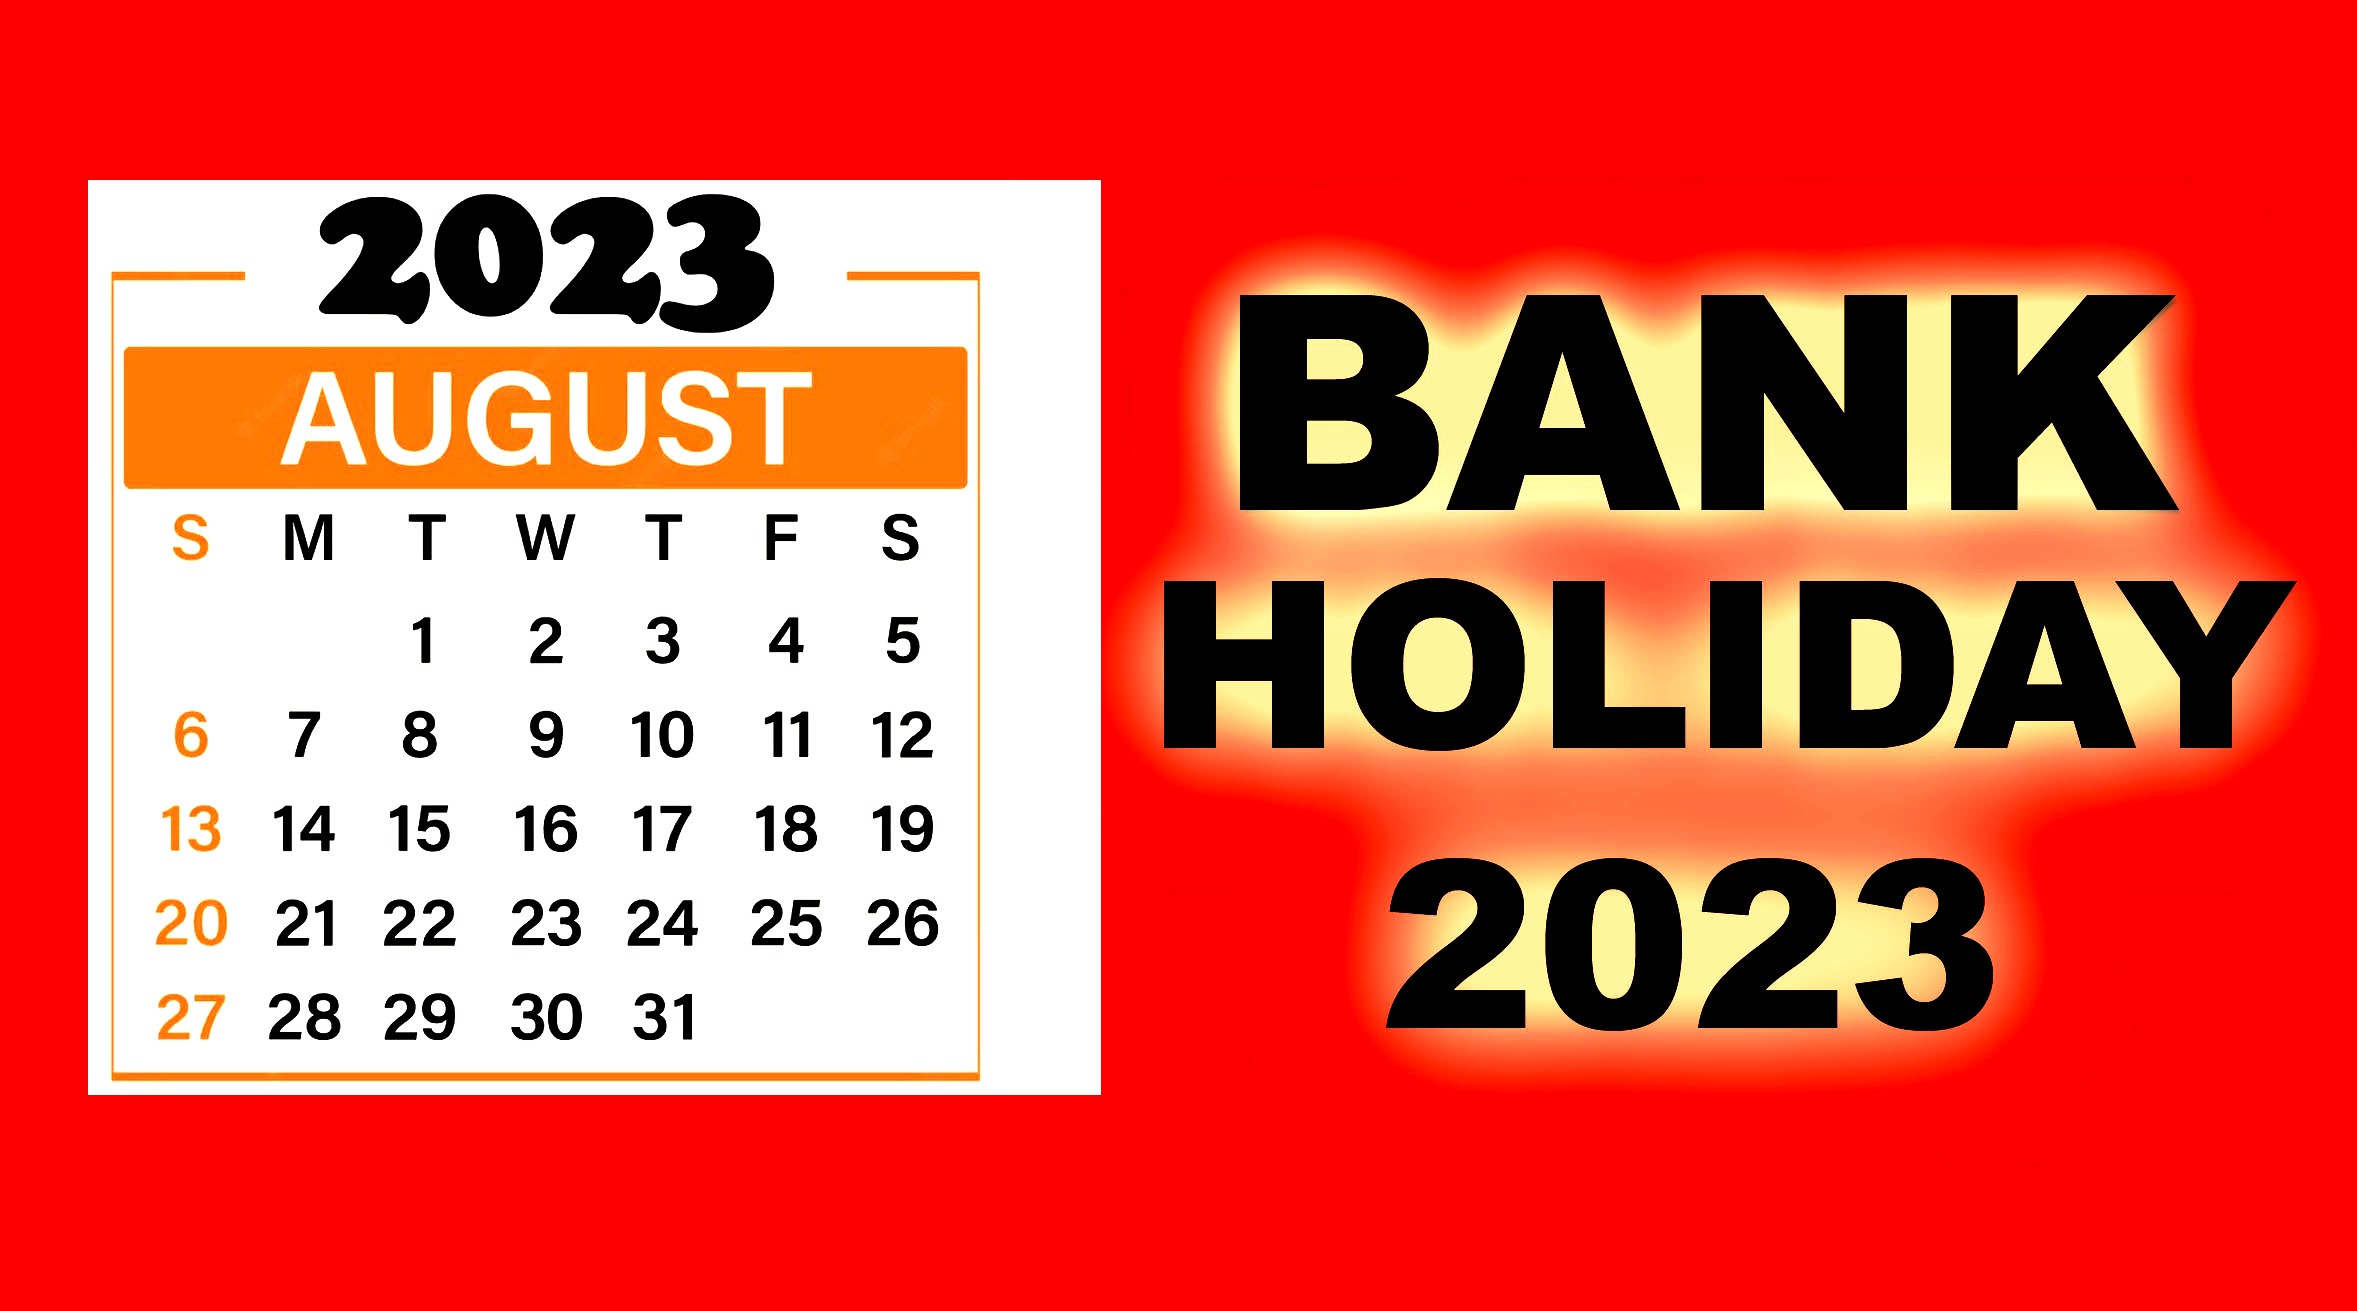 Bank Holiday August 2023